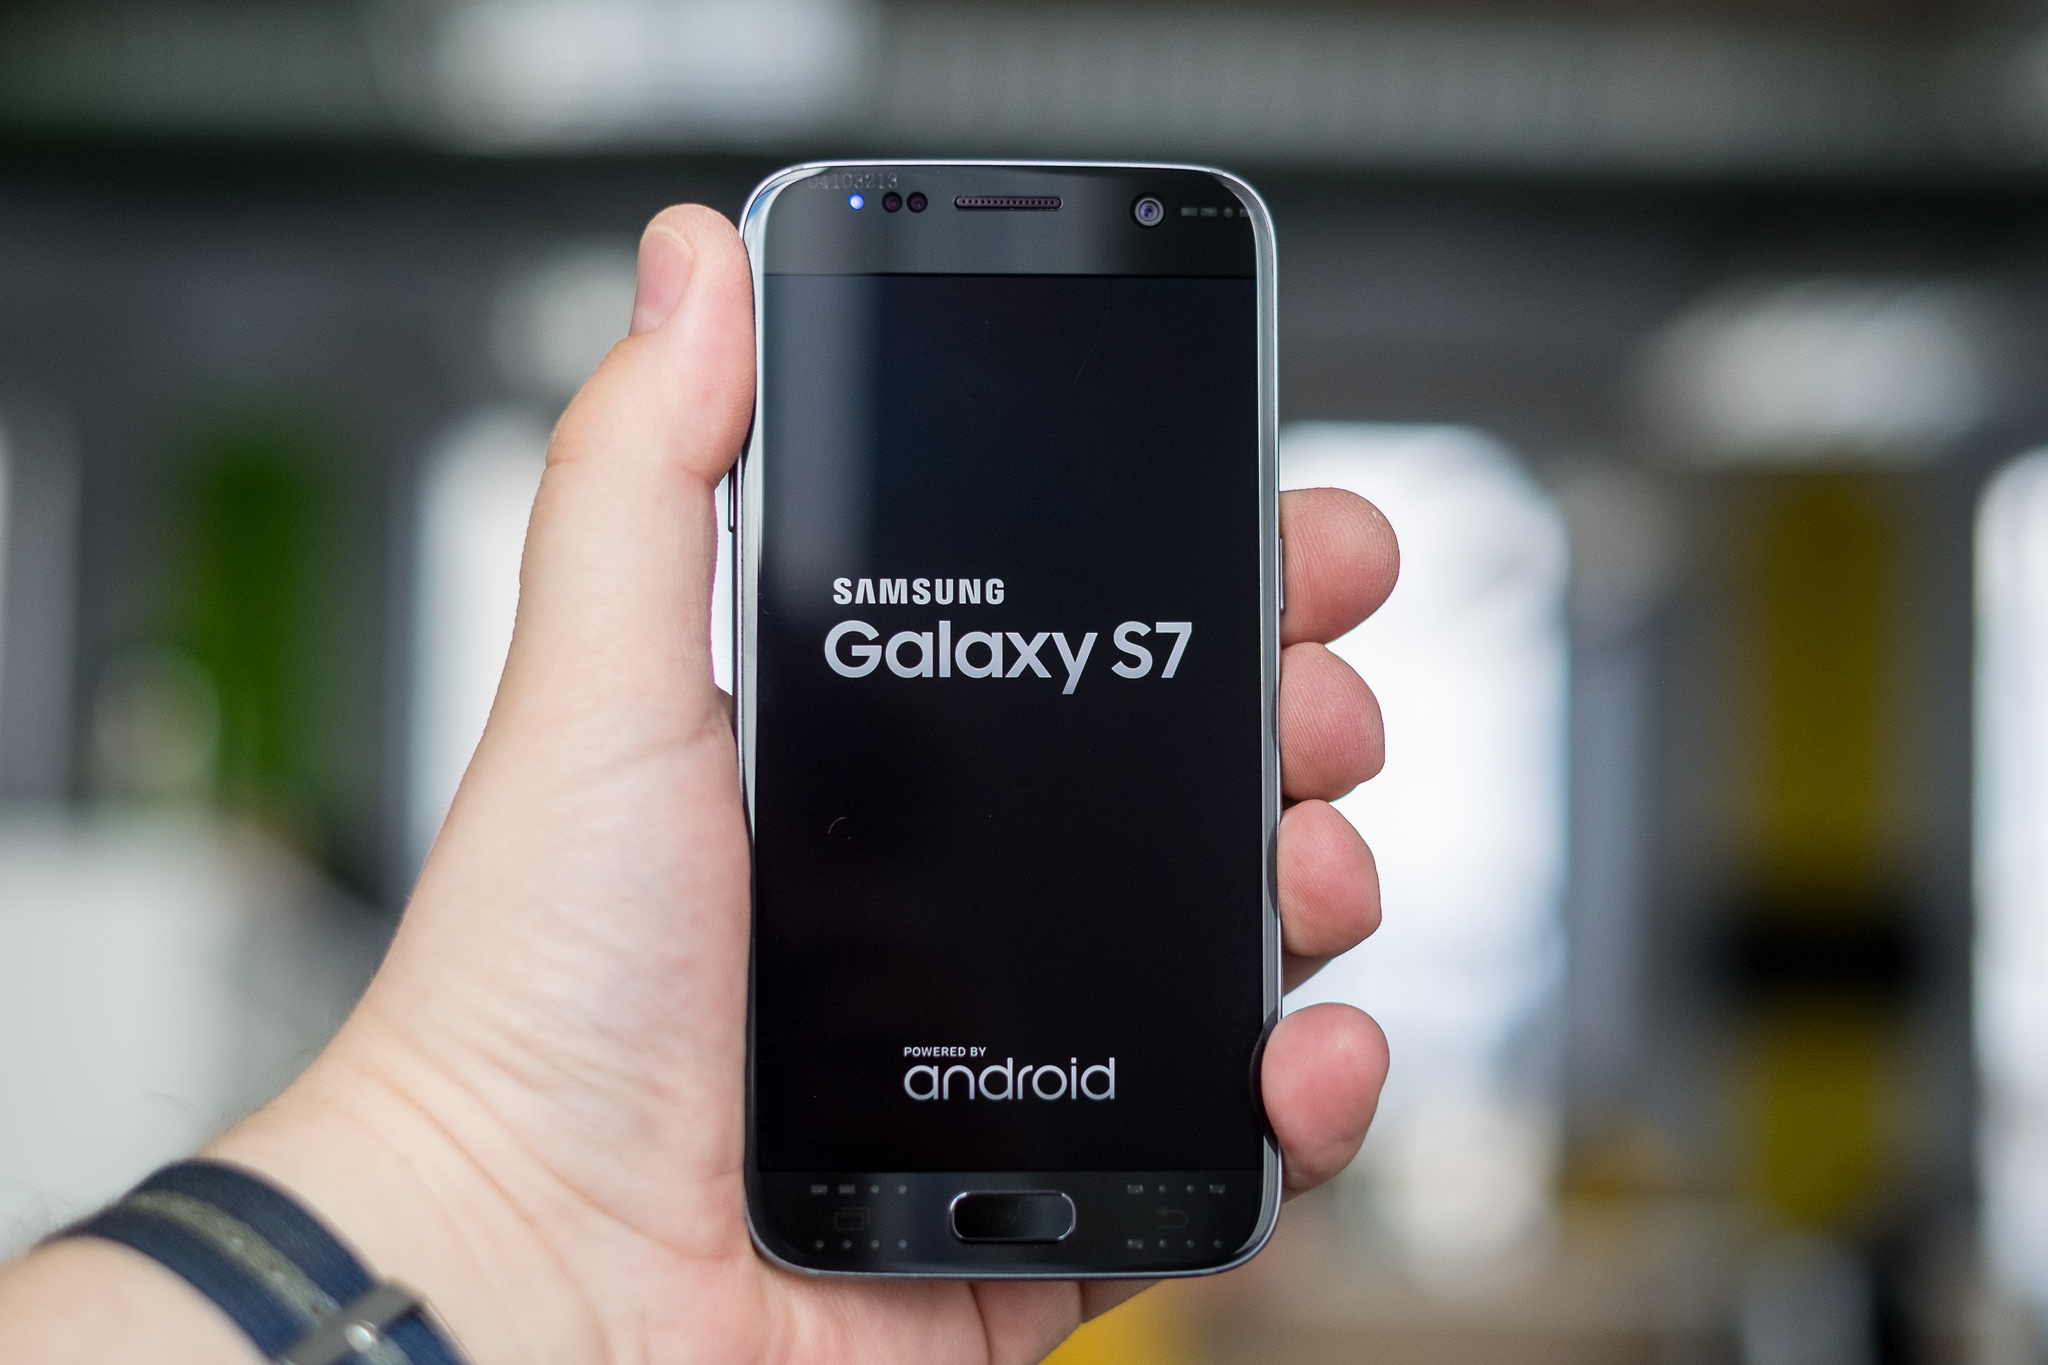 Leia gespannen Volg ons Samsung Galaxy S7 review: This is the Android phone you've been waiting for  - SiliconANGLE